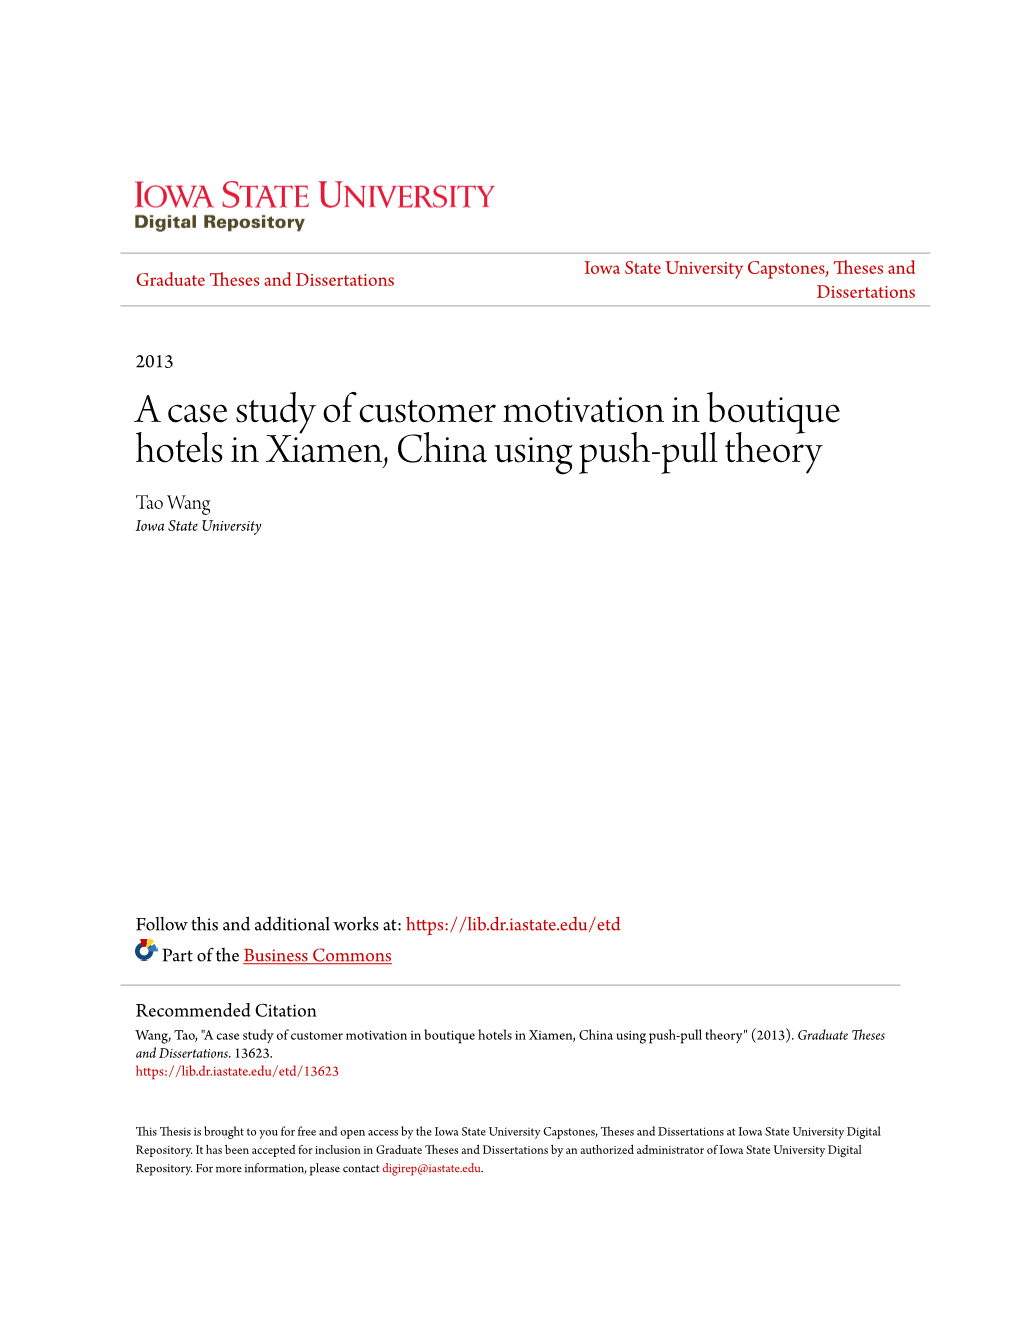 A Case Study of Customer Motivation in Boutique Hotels in Xiamen, China Using Push-Pull Theory Tao Wang Iowa State University